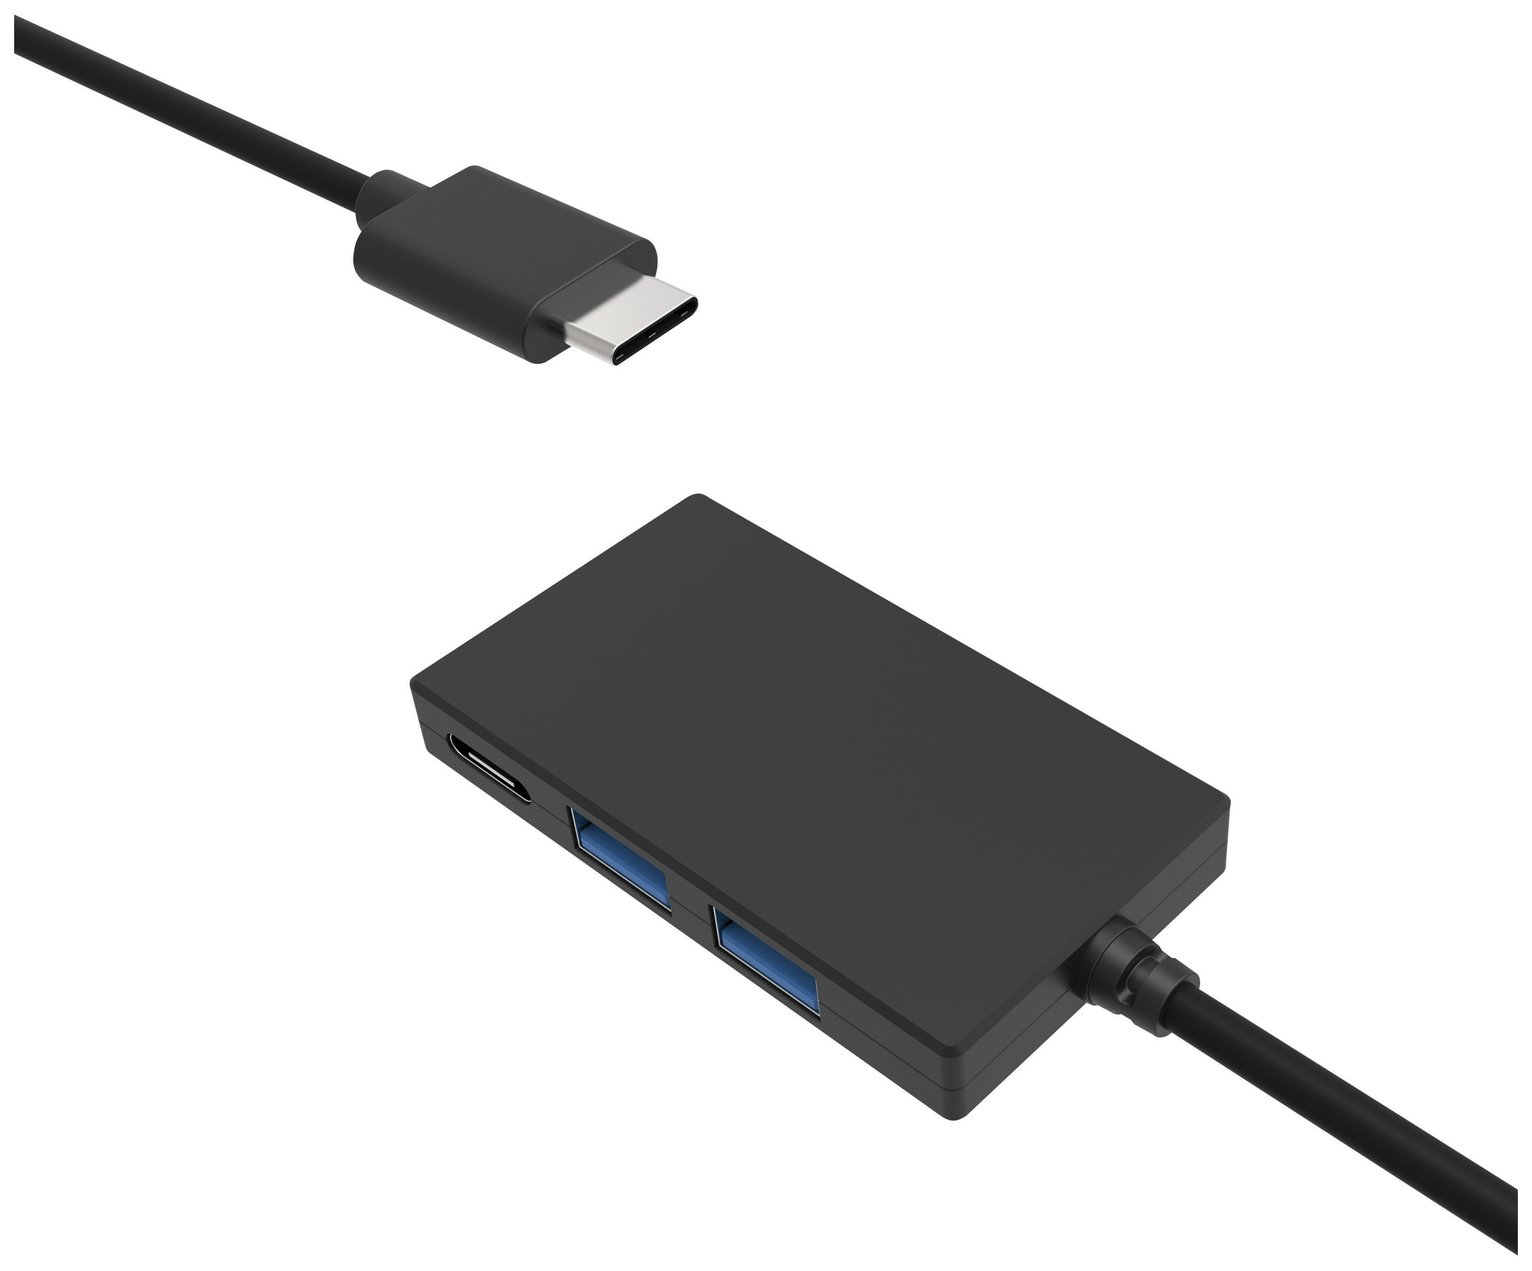 iStar - USB Type C to - USB Type C 3 Port Hub Review - Review Electronics